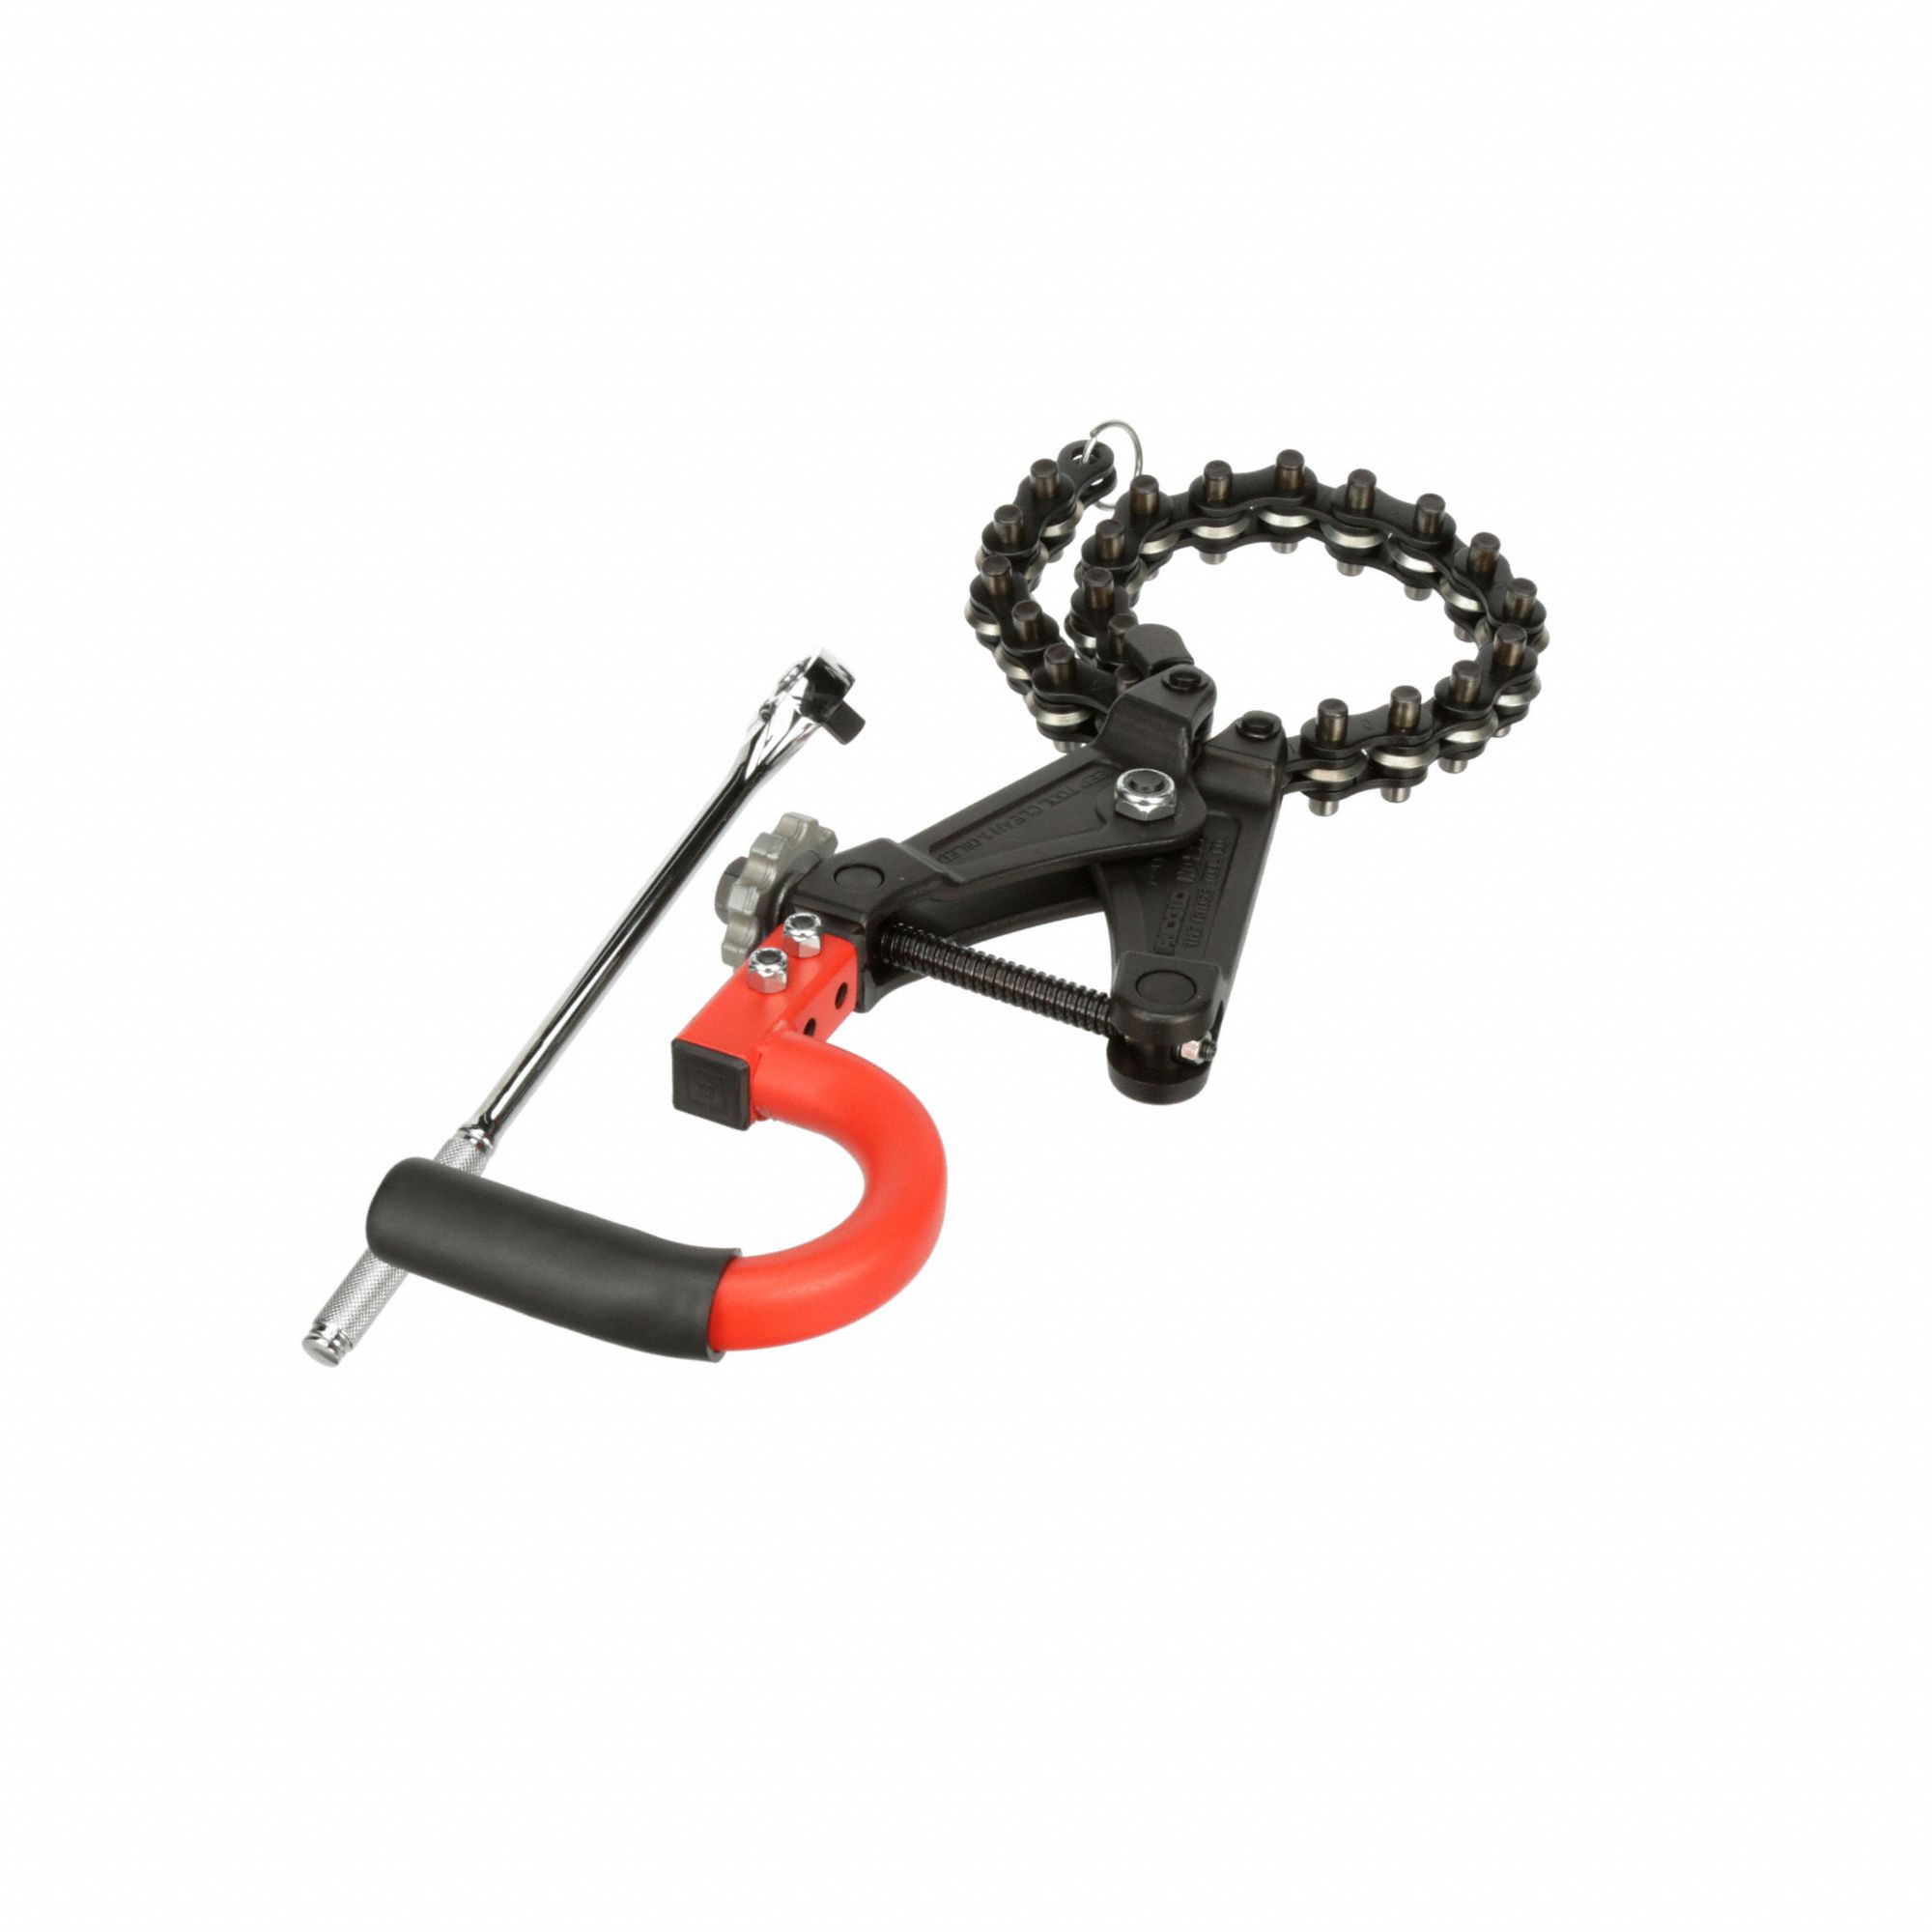 The hardest working XH ratchet chain pipe cutters